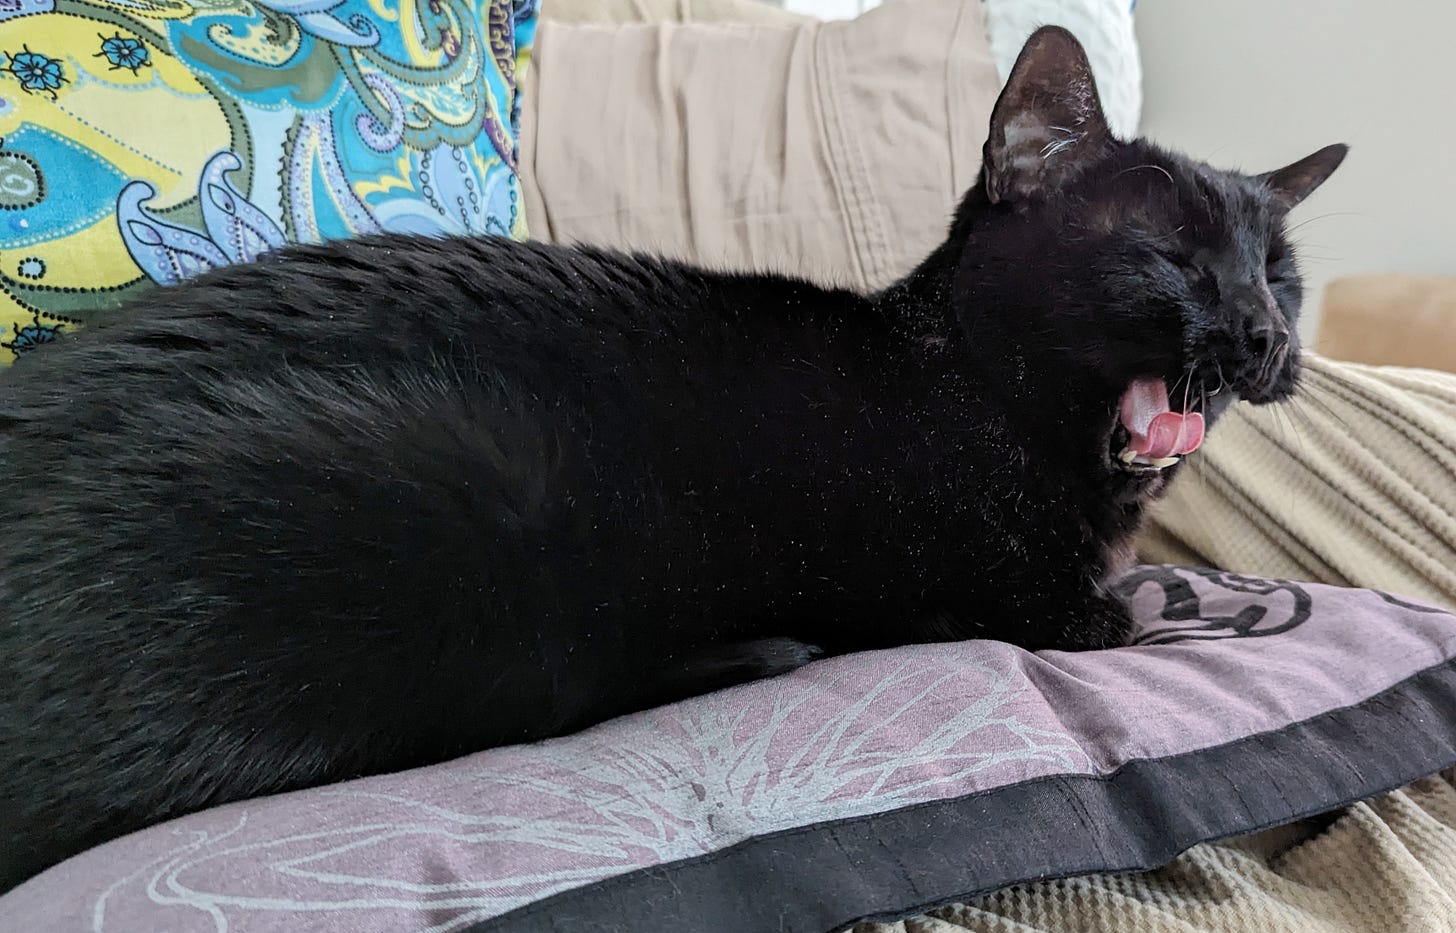 A black cat, stretched out on a purple pillow, yawns widely, showing off his pink tongue.